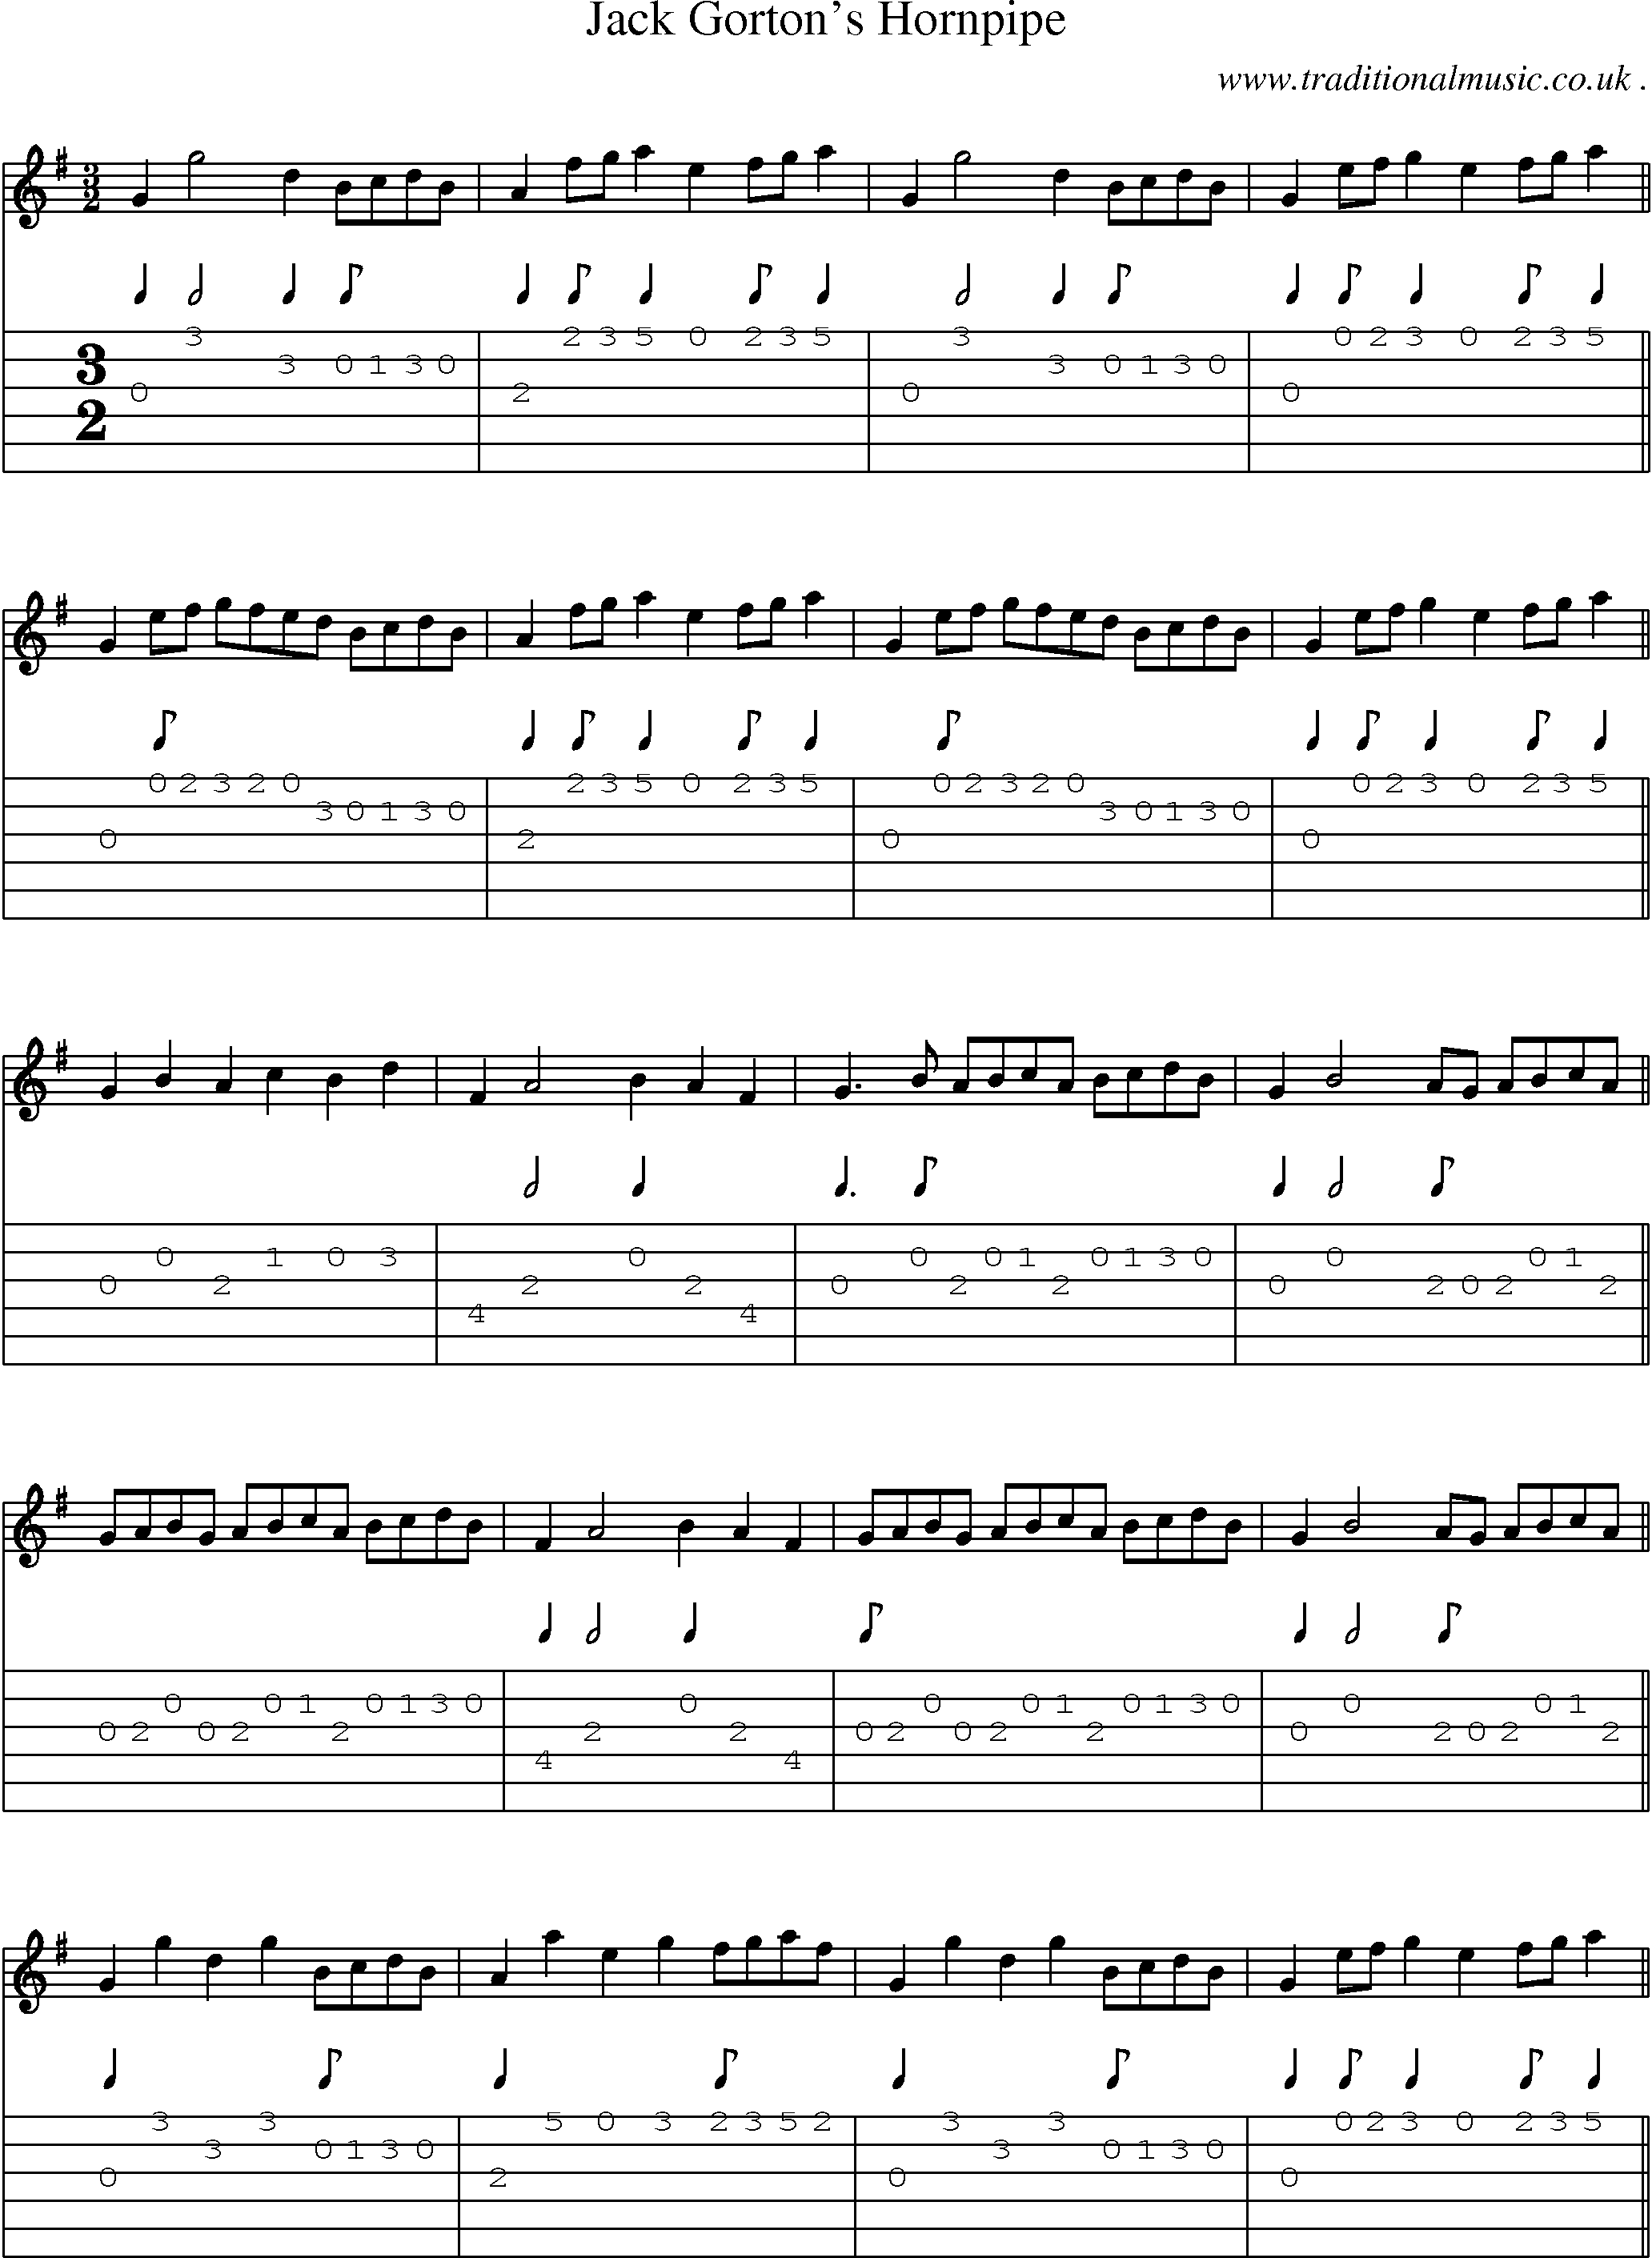 Sheet-Music and Guitar Tabs for Jack Gortons Hornpipe